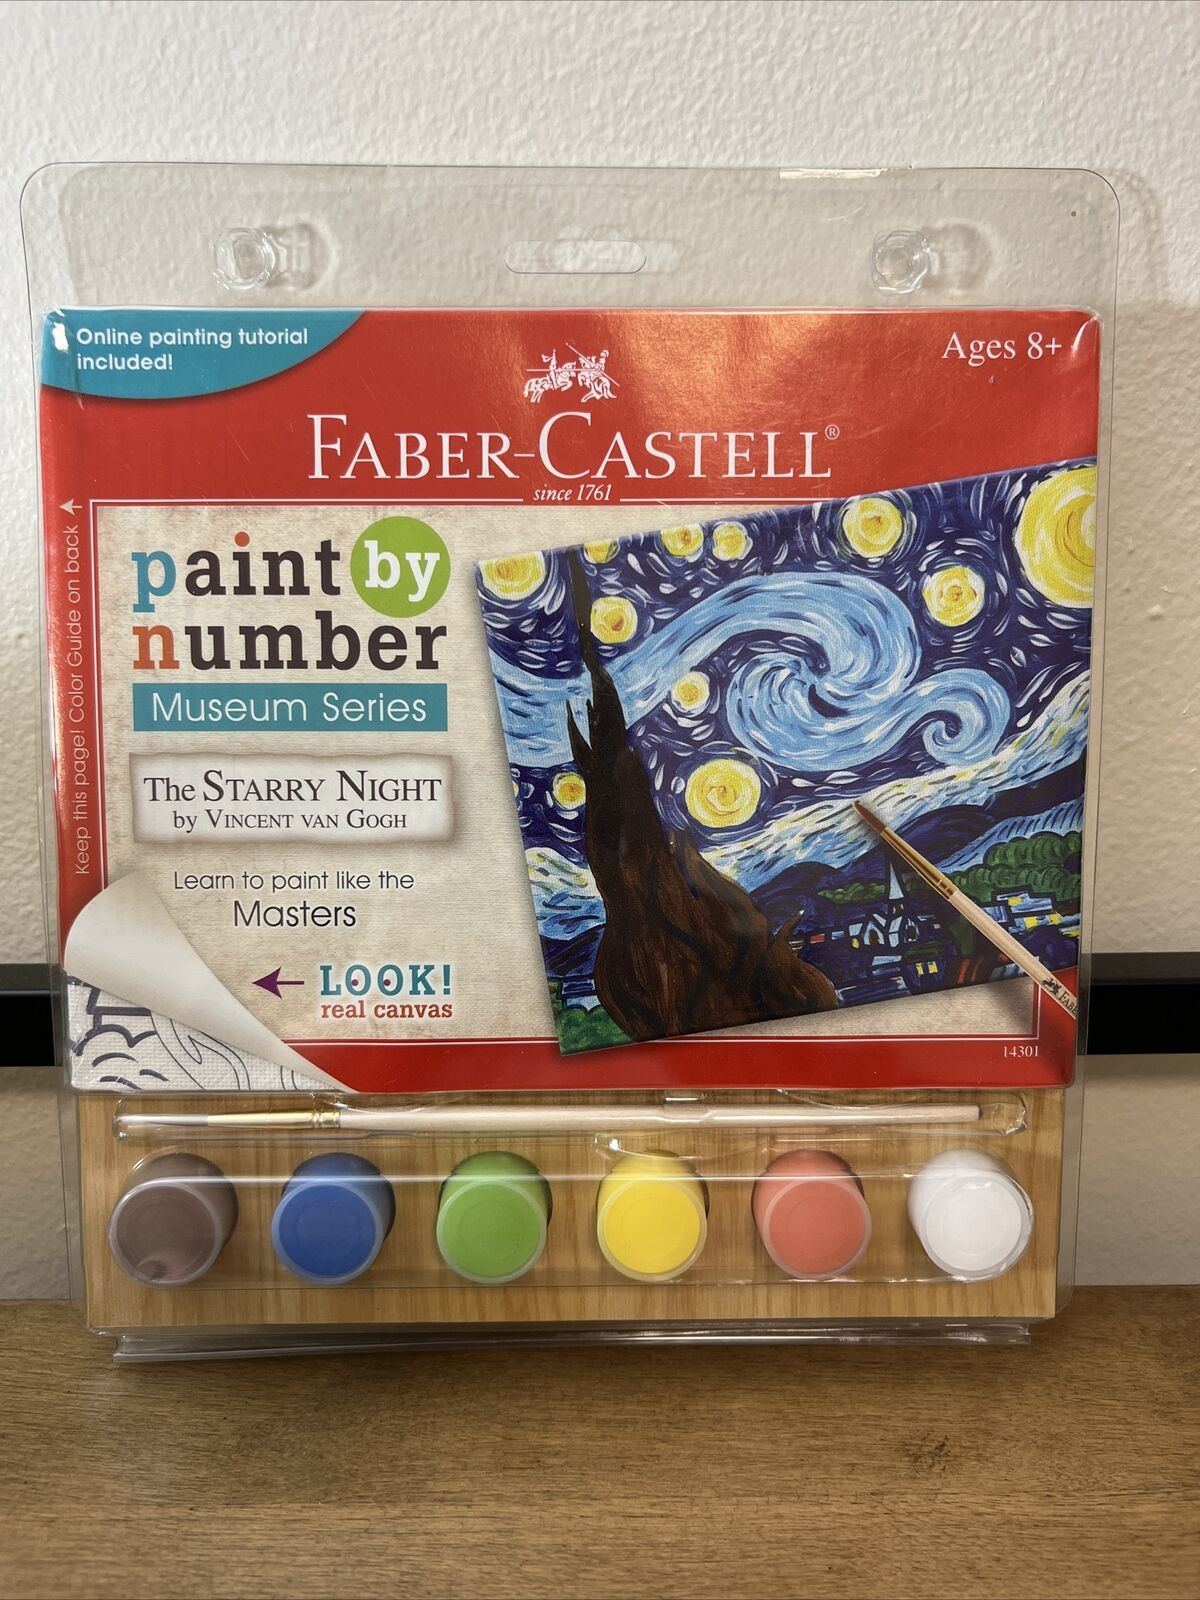 Faber Castell Paint By Number Museum Series The Starry Night by Vincent Van Gogh